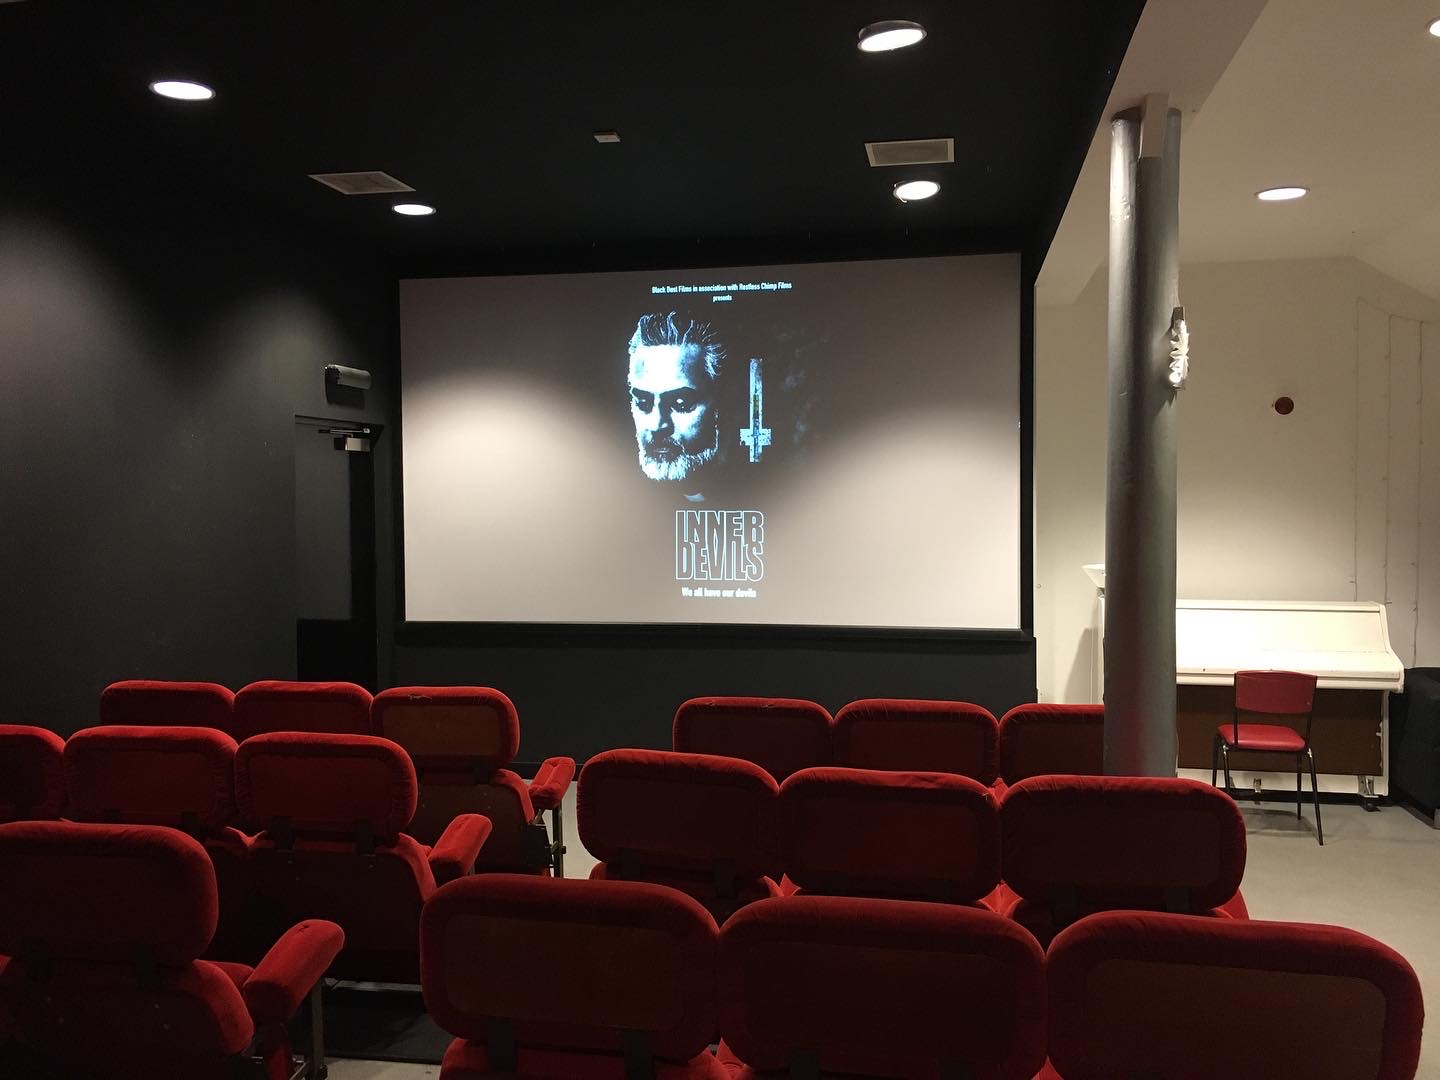 Photo taken at GMAC Film in Glasgow of their cinema screen with the 'Inner Devils' poster on display.